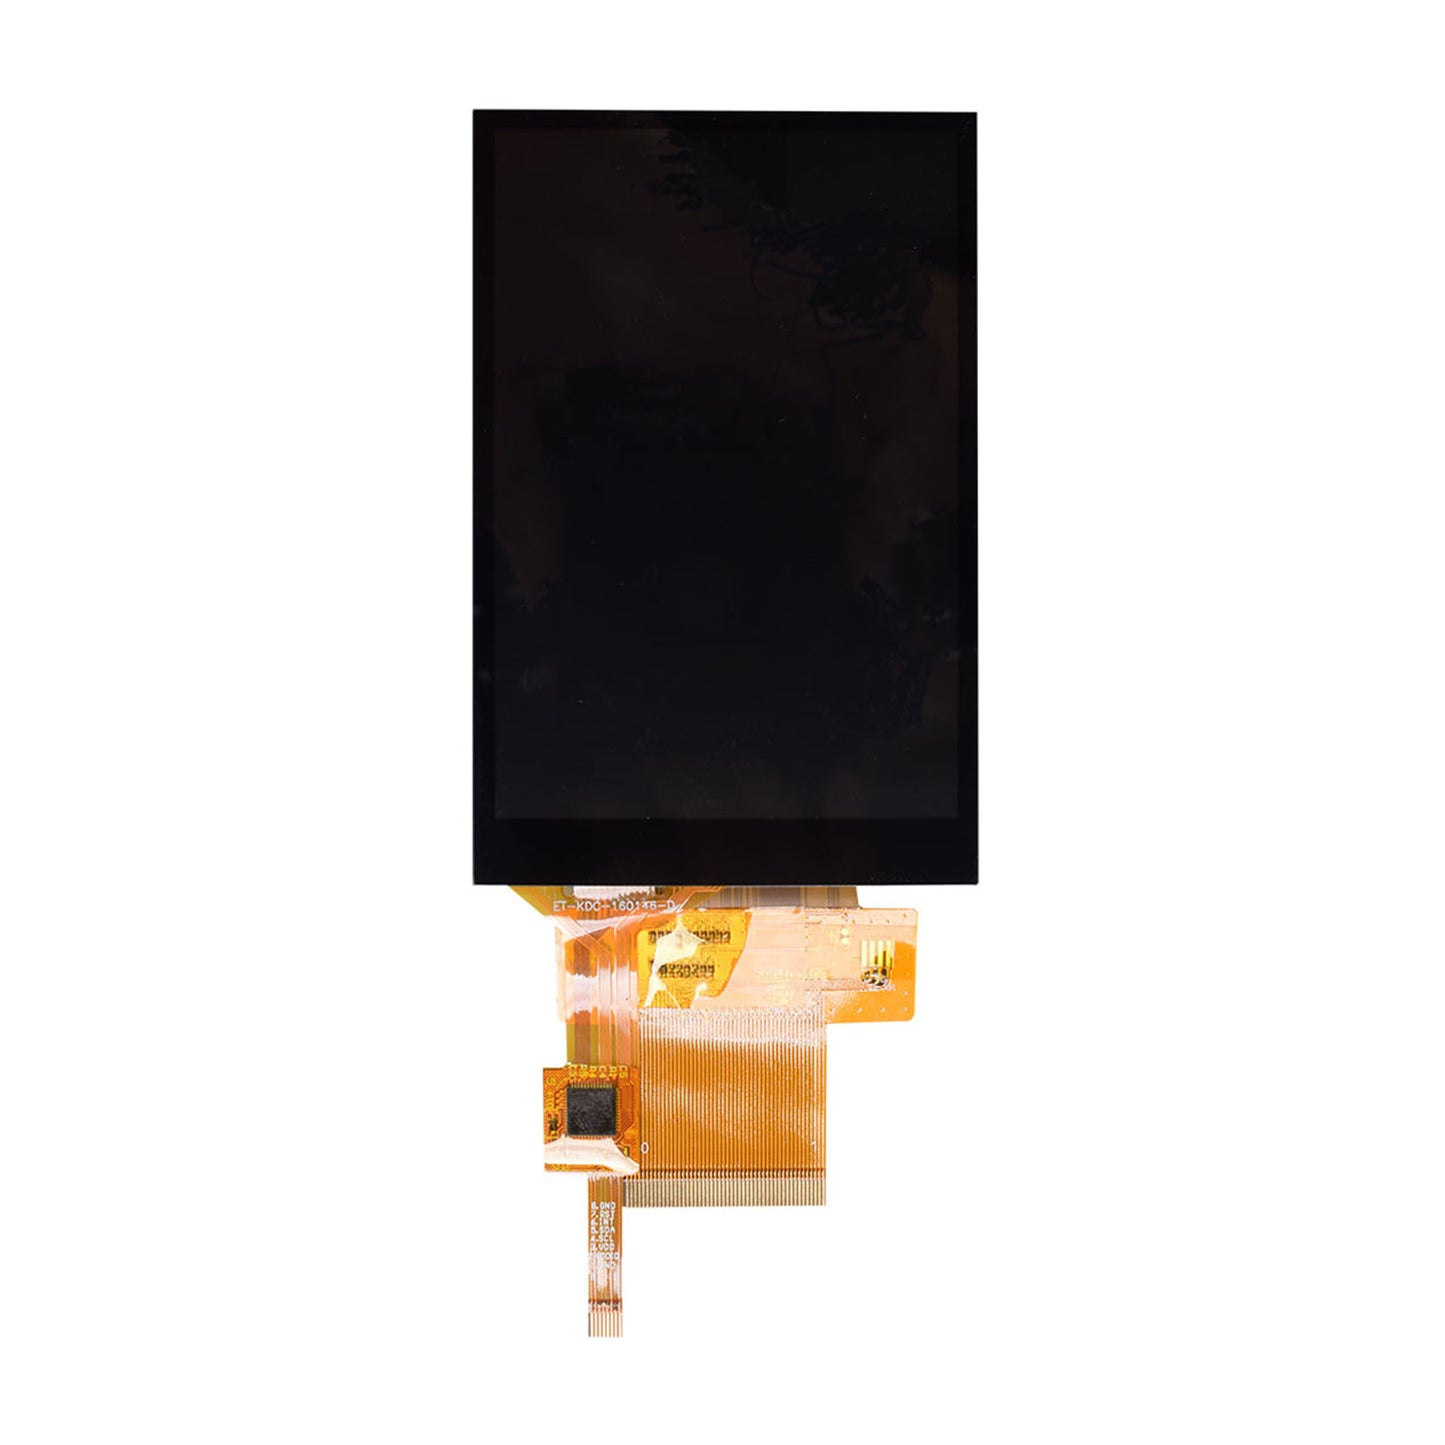 DisplayModule 4.0" 320x480 Display Panel with Capacitive Touch - SPI, MCU, RGB